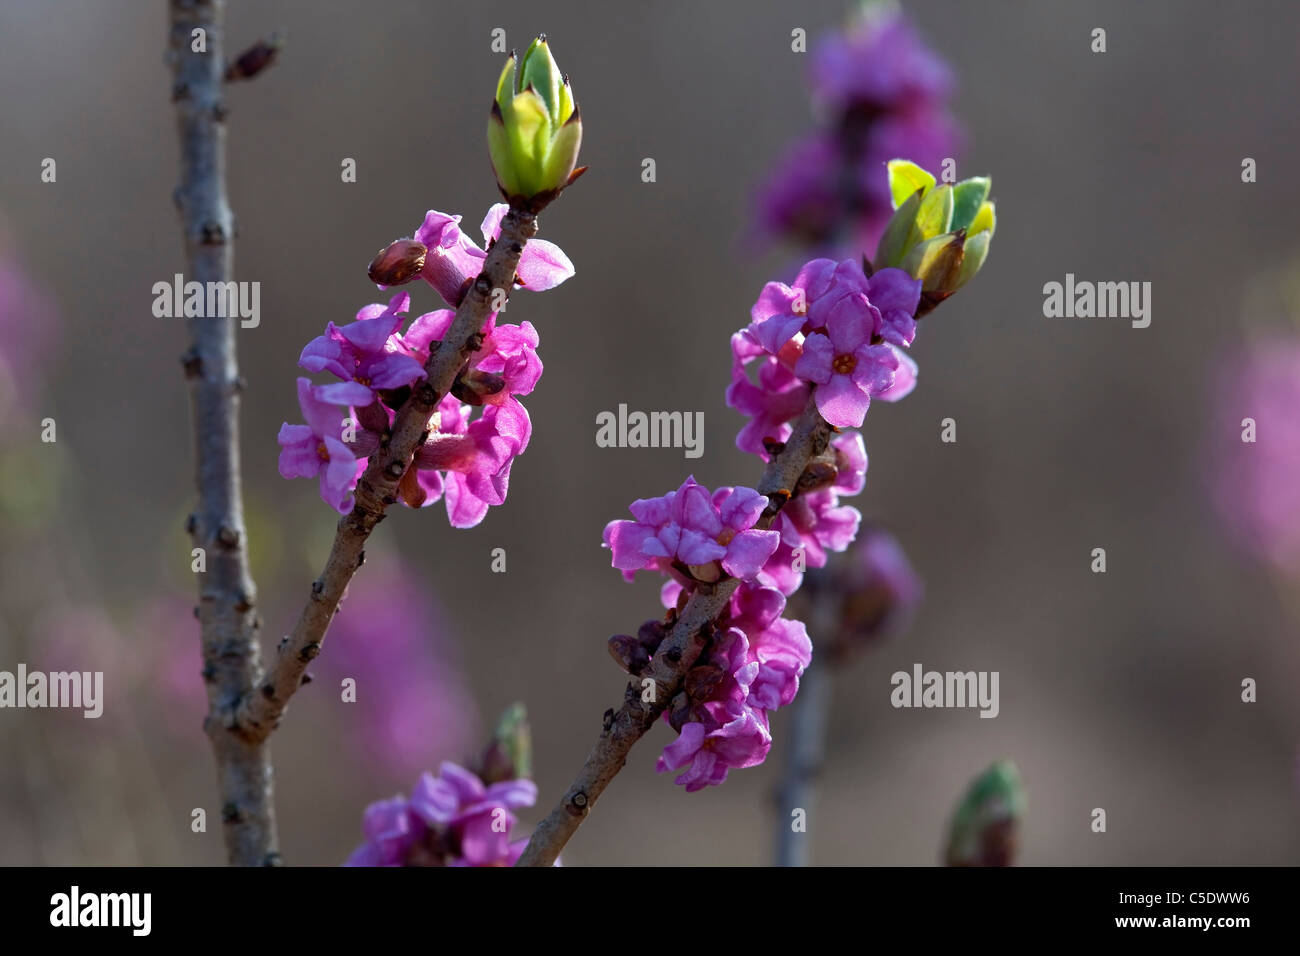 Close-up of Daphne flowers and branch against blurred background Stock Photo